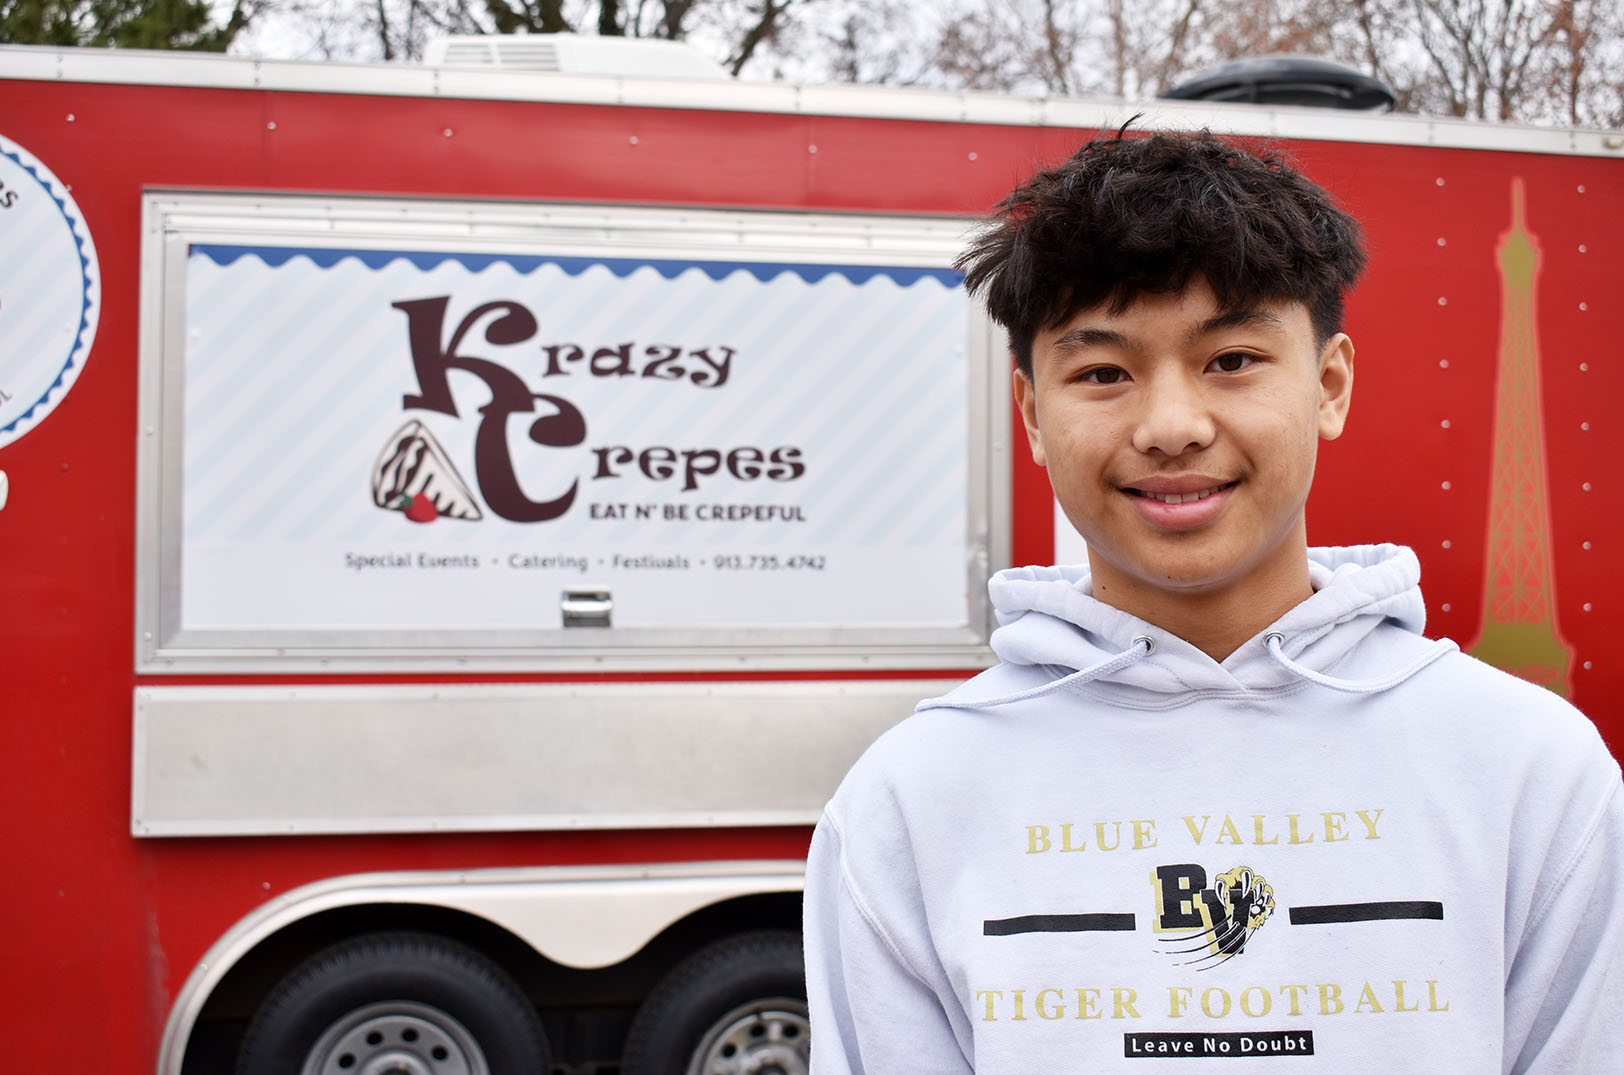 At 13, he begged his mother to let him cook; now this Blue Valley teen runs a creperie on wheels